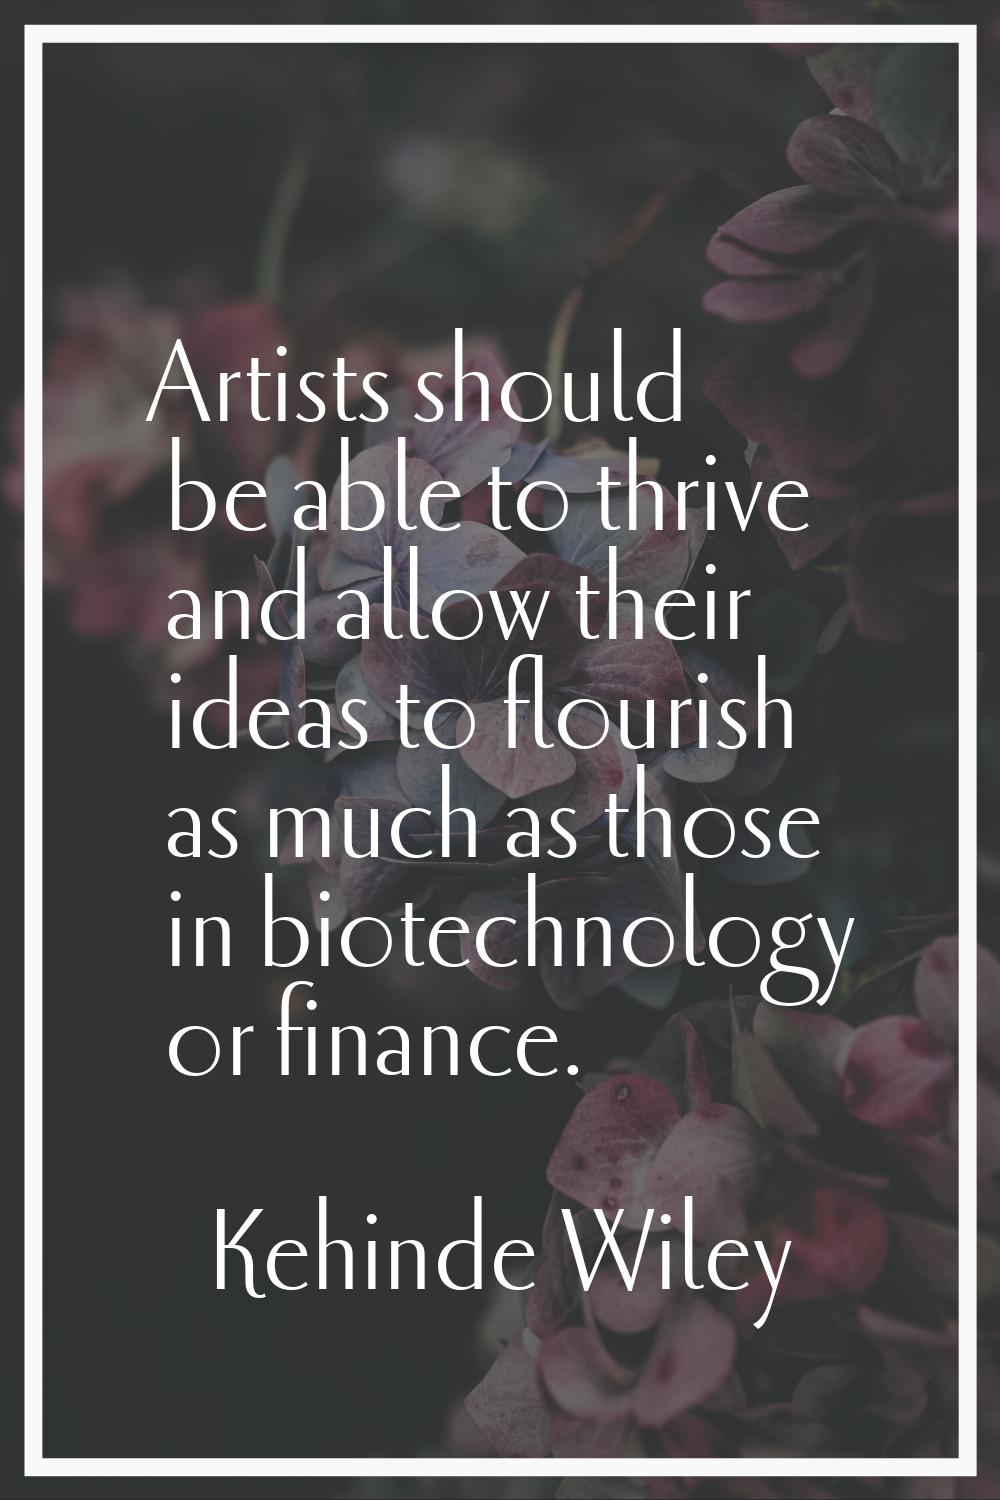 Artists should be able to thrive and allow their ideas to flourish as much as those in biotechnolog